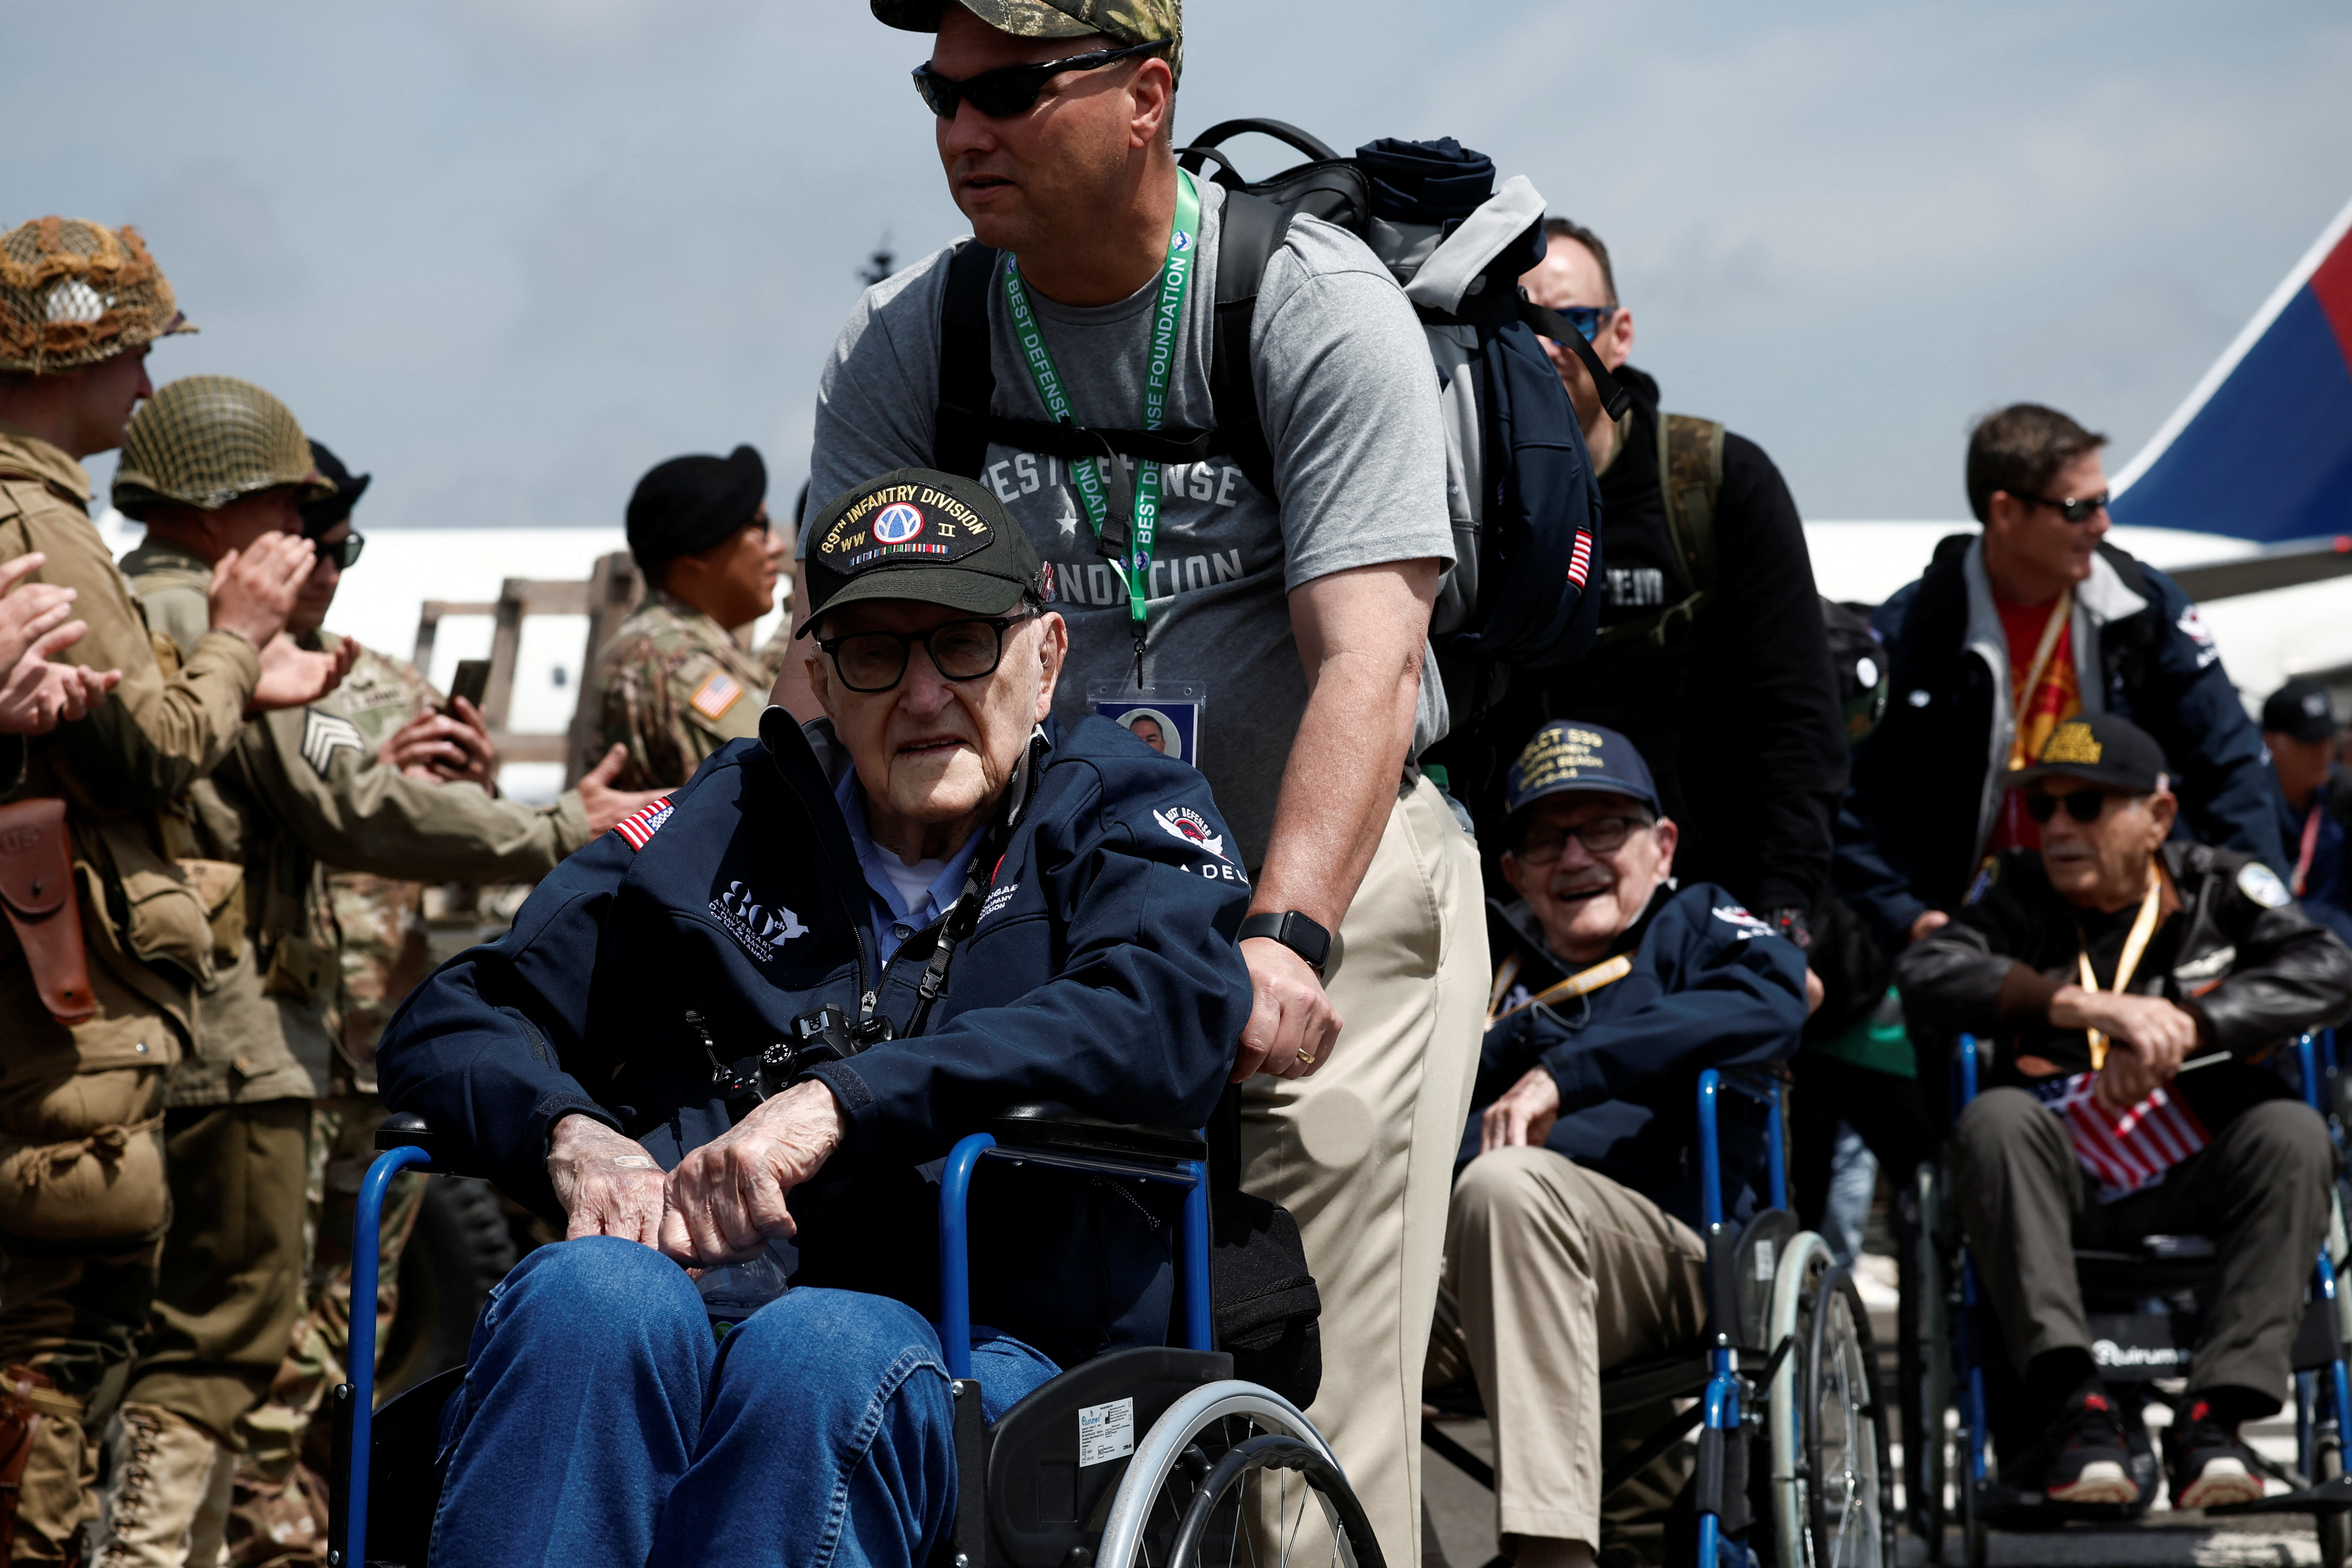 World War II Veterans arrive in Normandy, France to commemorate D-Day